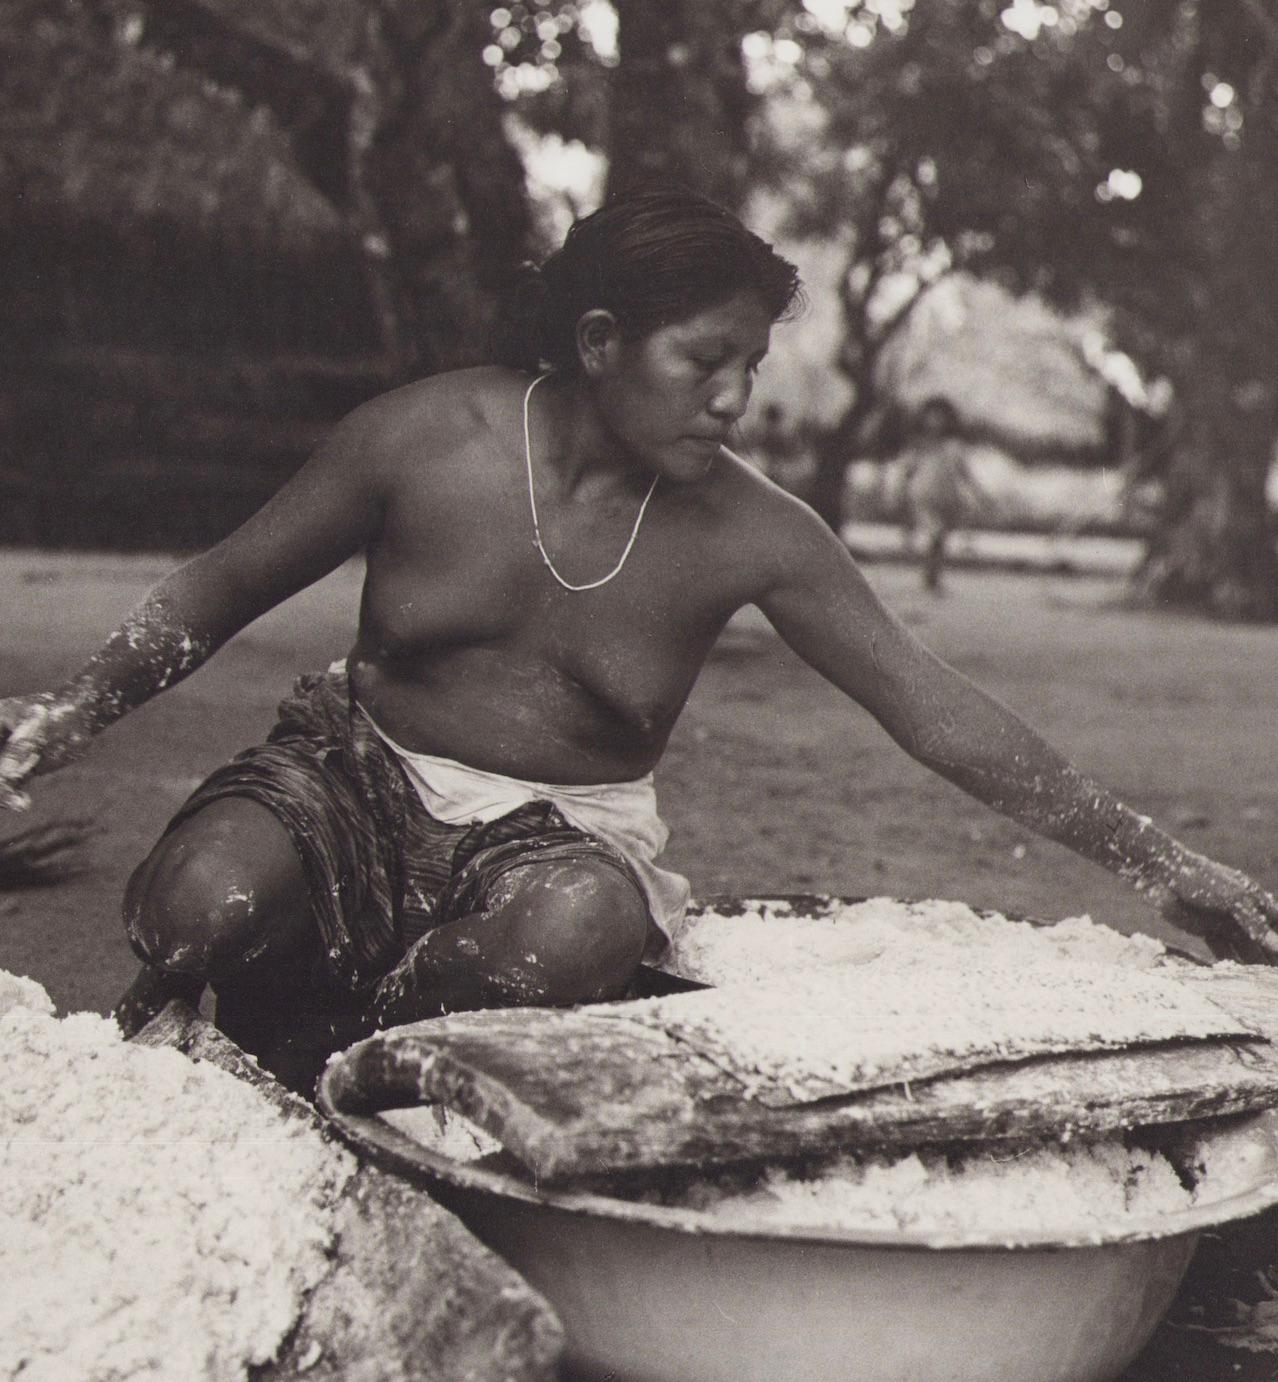 Suriname, Indigenous, Black and White Photography, 1960s, 24, 2 x 29, 3 cm For Sale 1